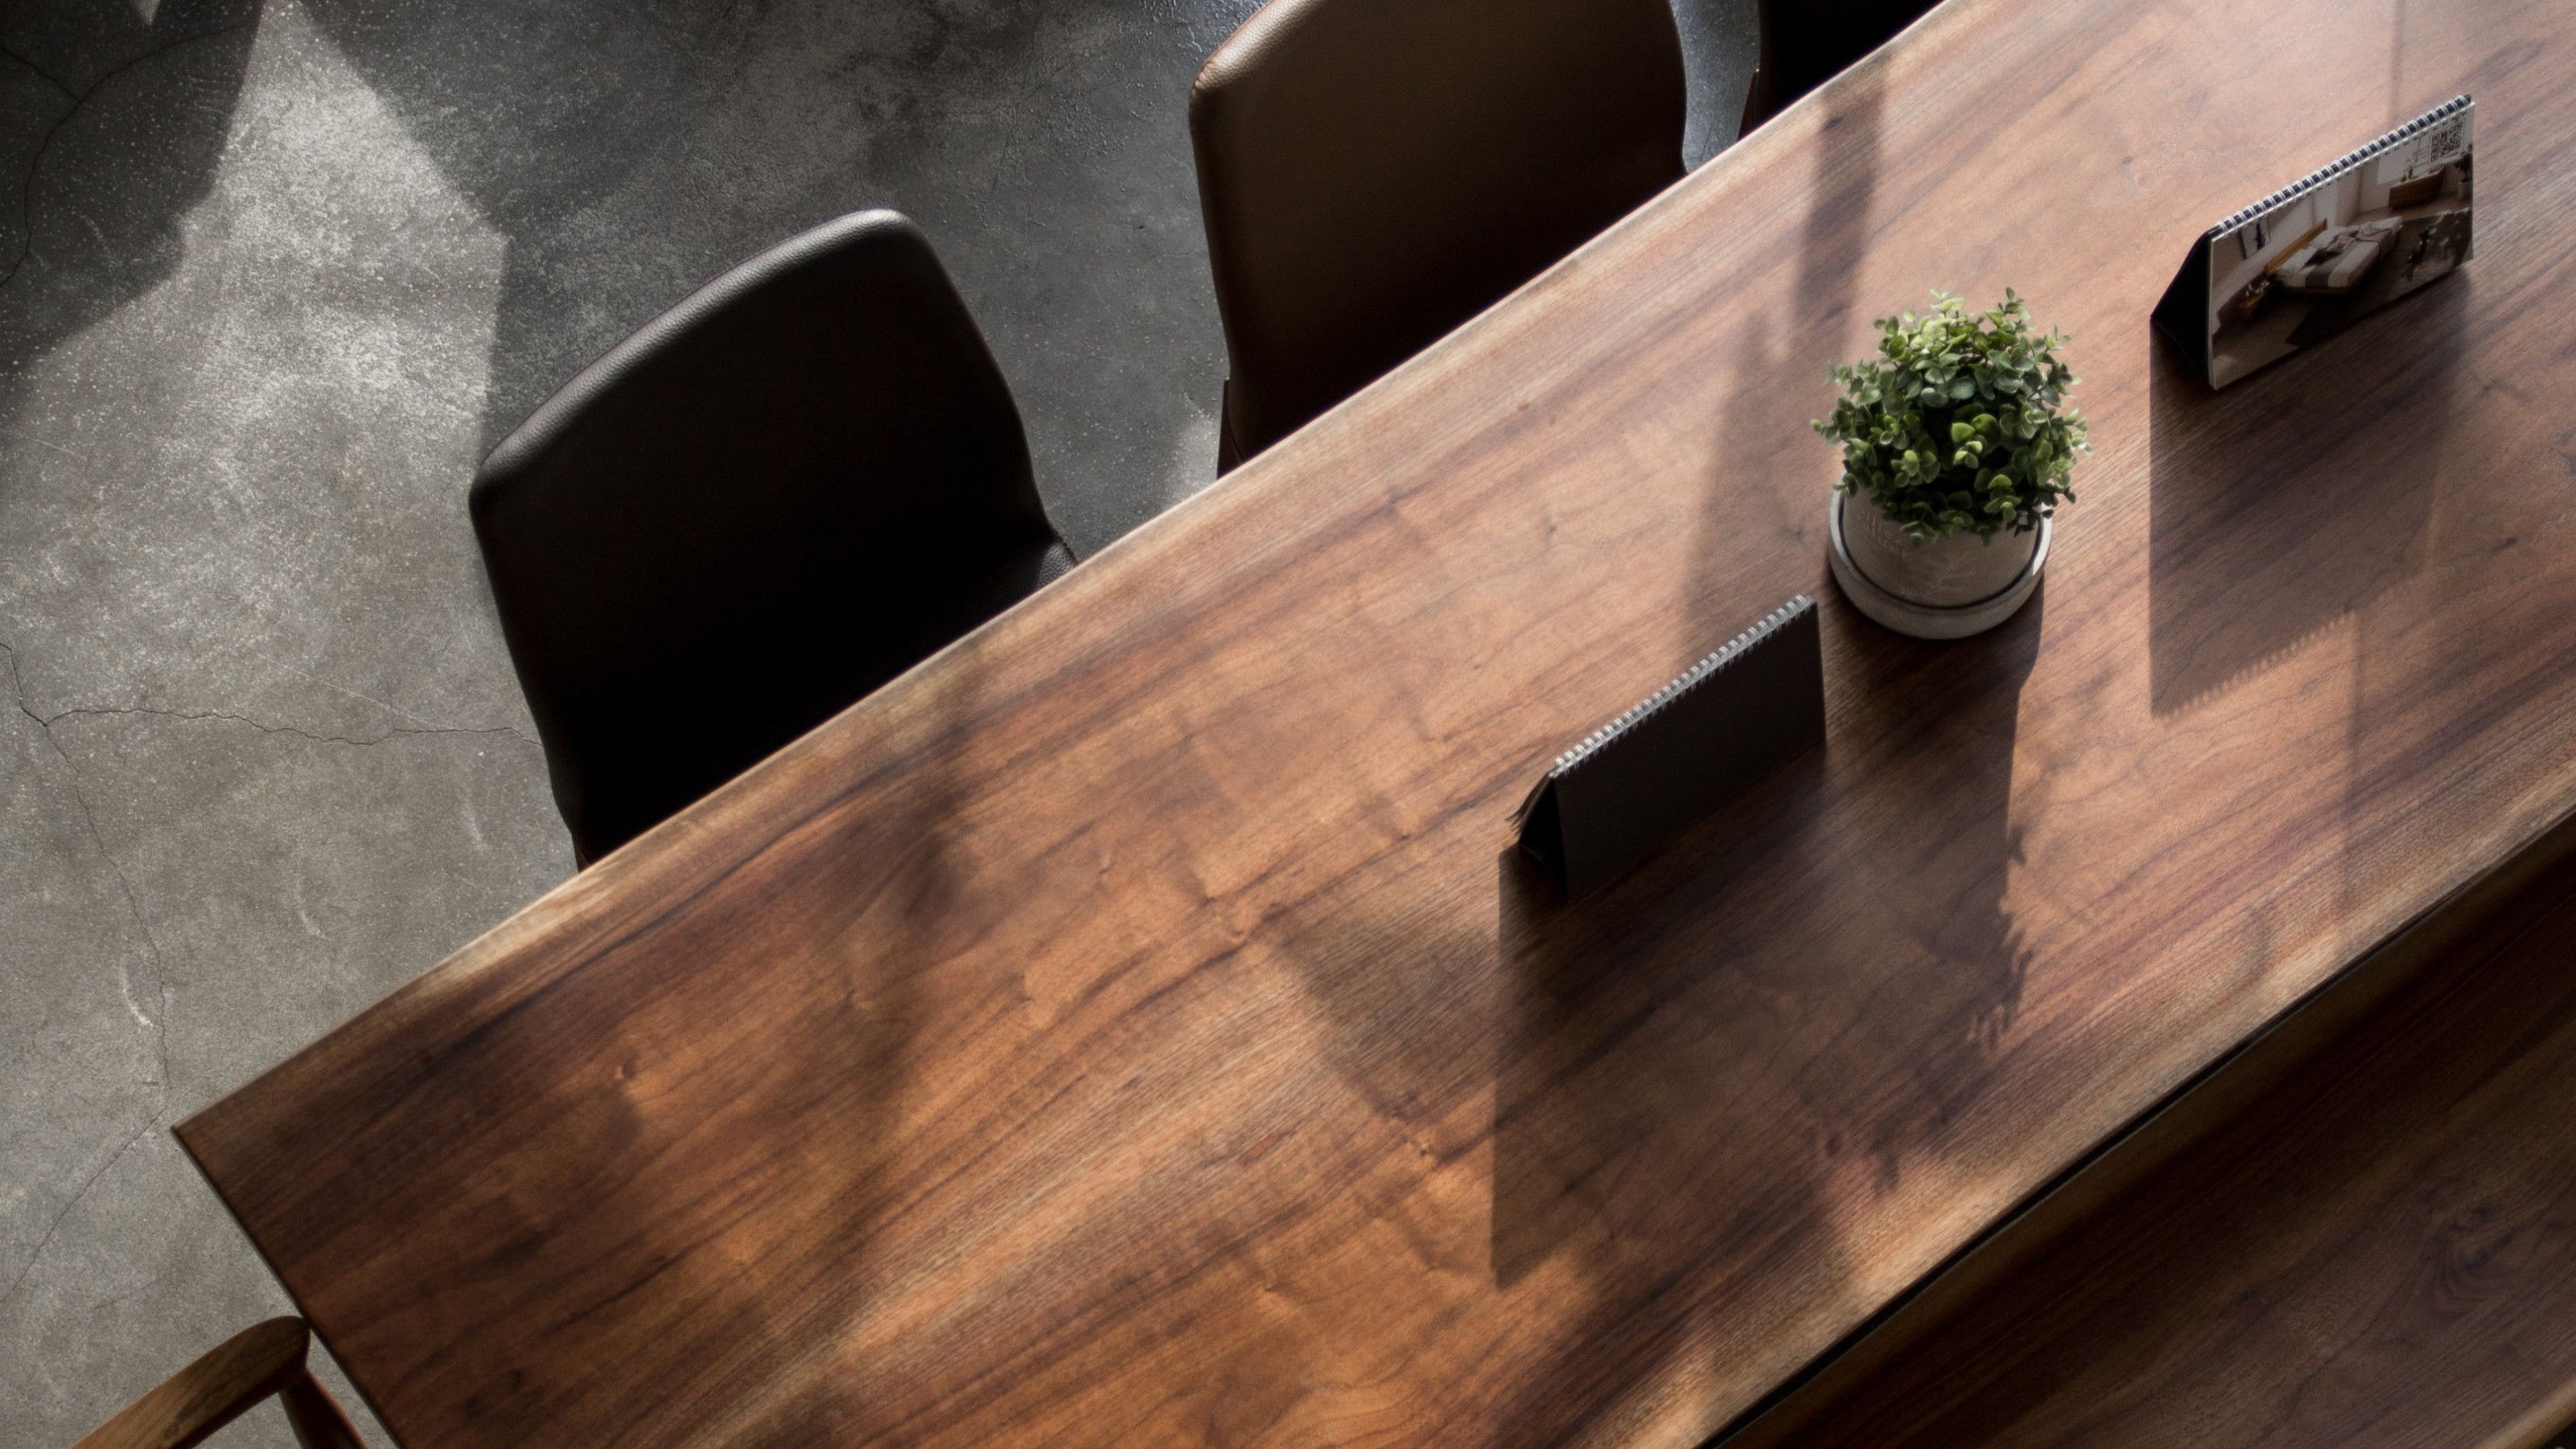 Corporate boardroom table with a pot plant on it